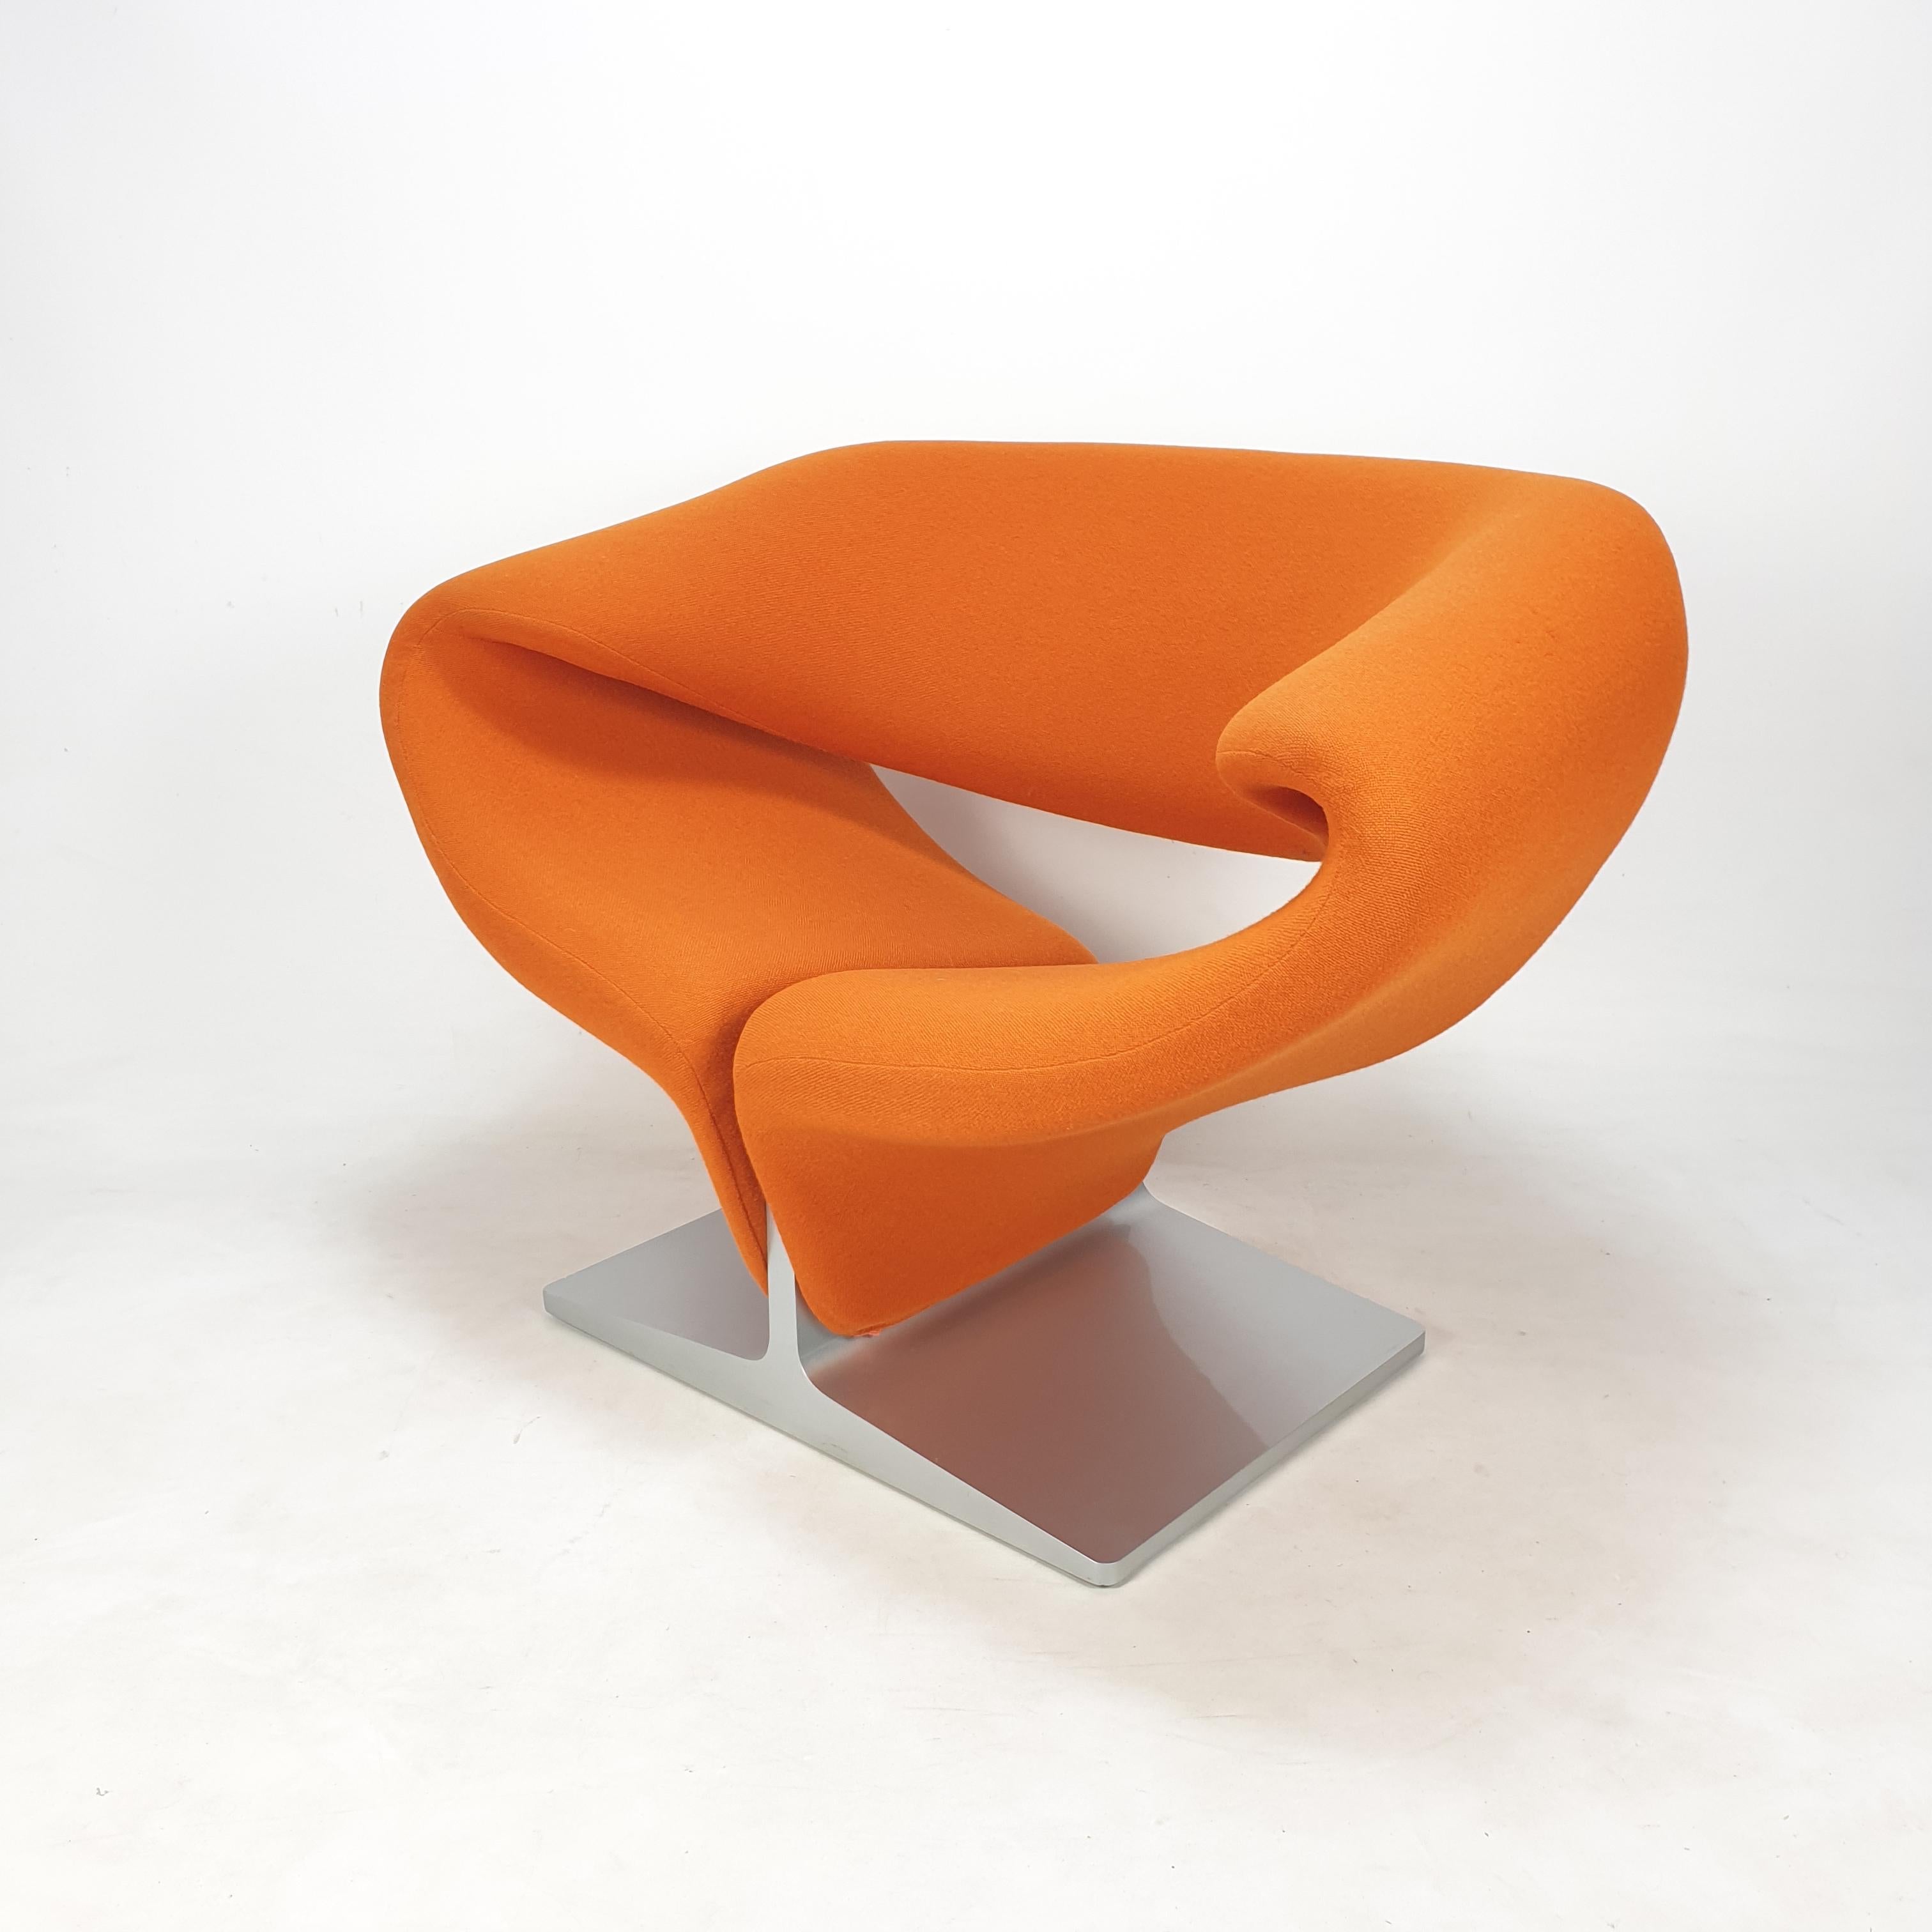 Stunning Ribbon chair, designed by the French designer Pierre Paulin in the 60's. 
It is produced by Artifort, The Netherlands. 
The chair is amazingly comfortable. 

It has the original orange fabric and metal lacquered wooden foot. 
The high